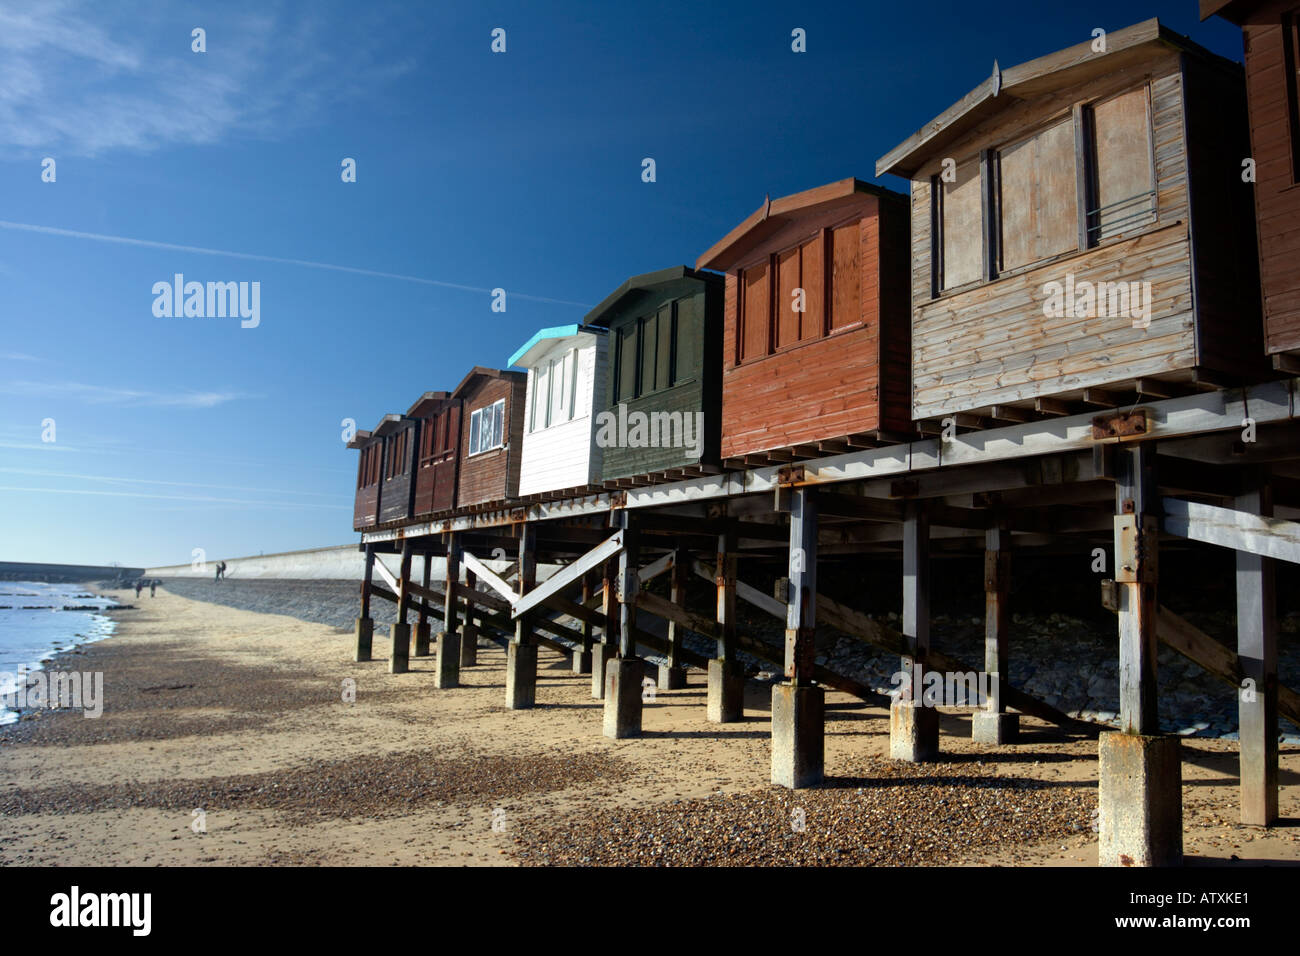 A row of traditional beach huts on stilts at Frinton on sea, showing the concrete sea wall behind Stock Photo